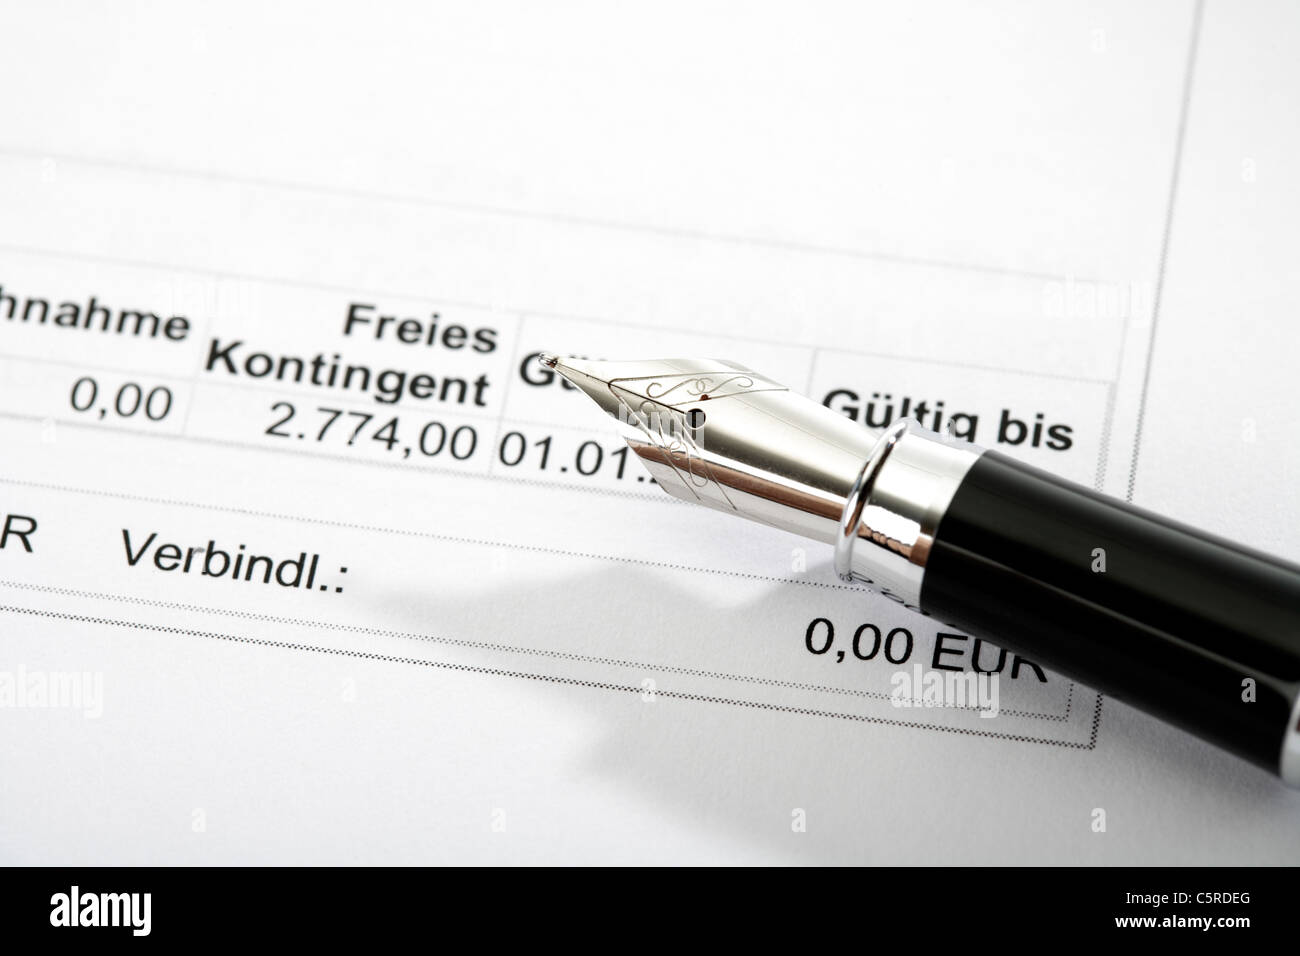 Pen lying on exemption order, close-up Stock Photo